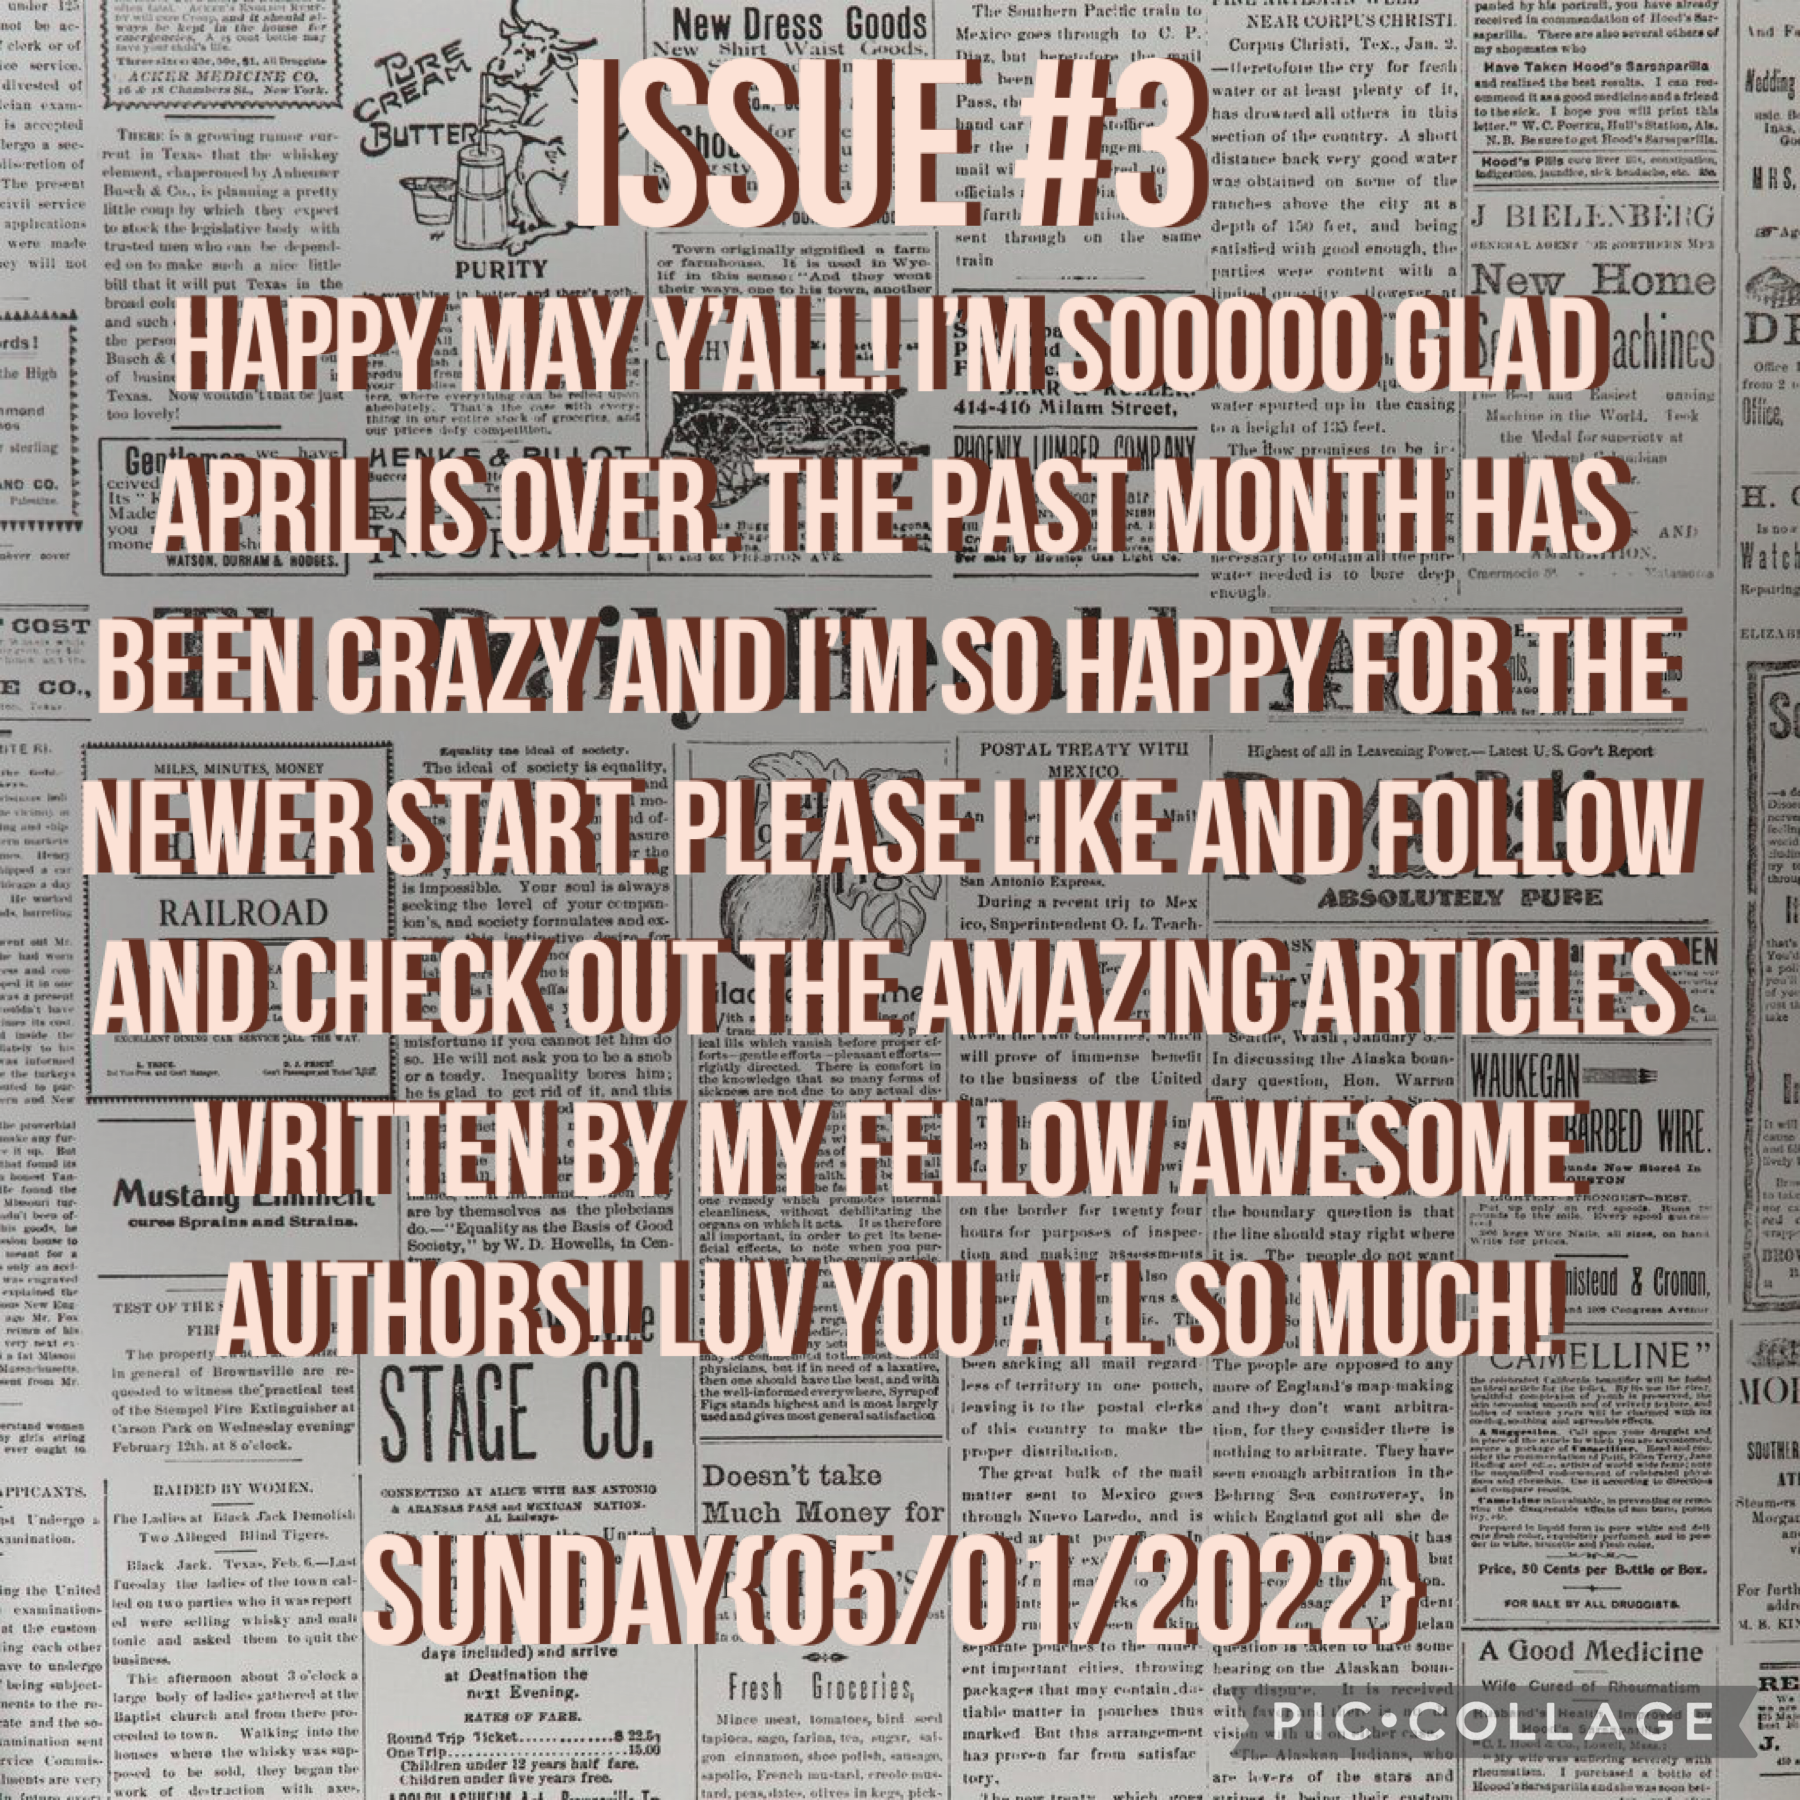 ISSUE #3